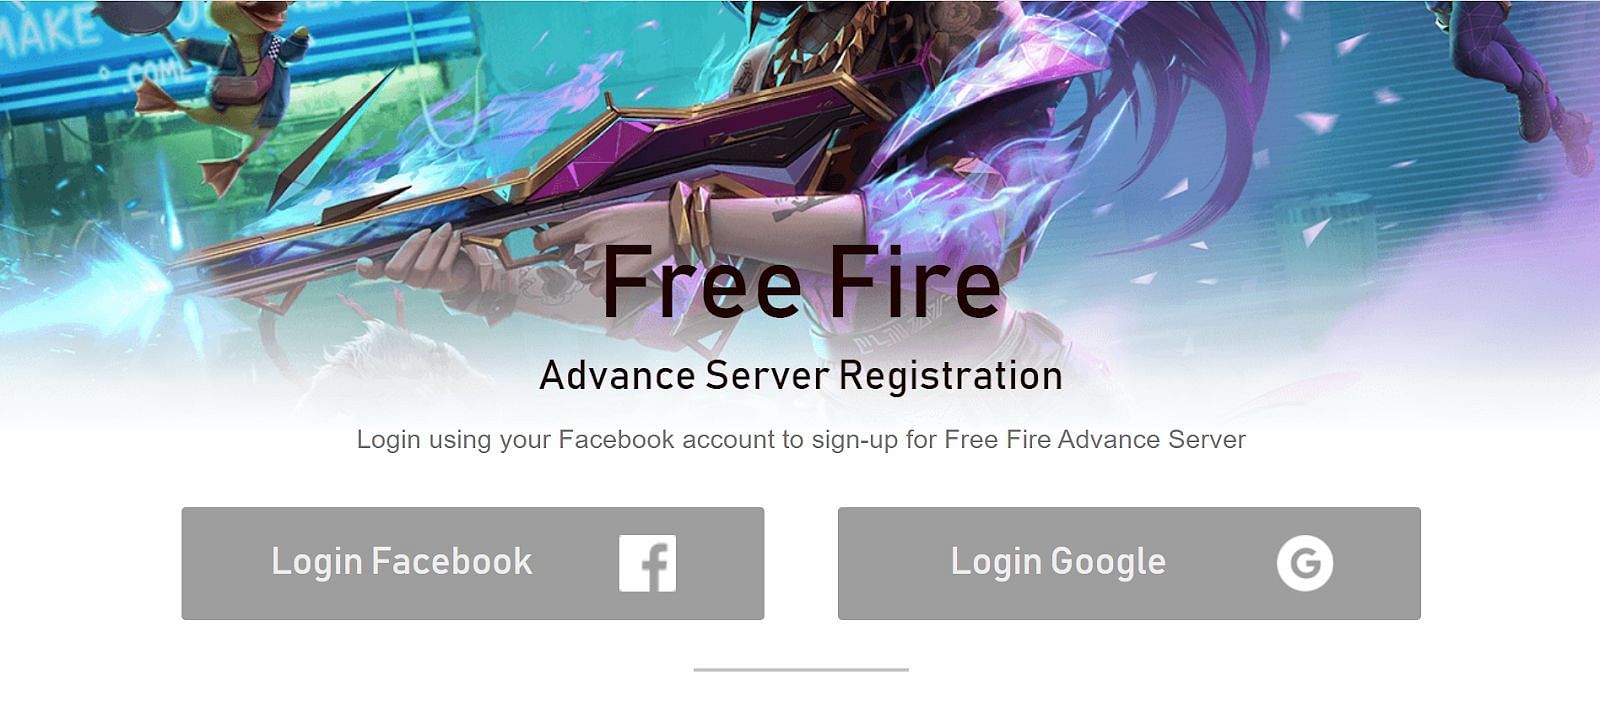 There are two sign-up/sign-in options for Advance Server (Image via Garena)